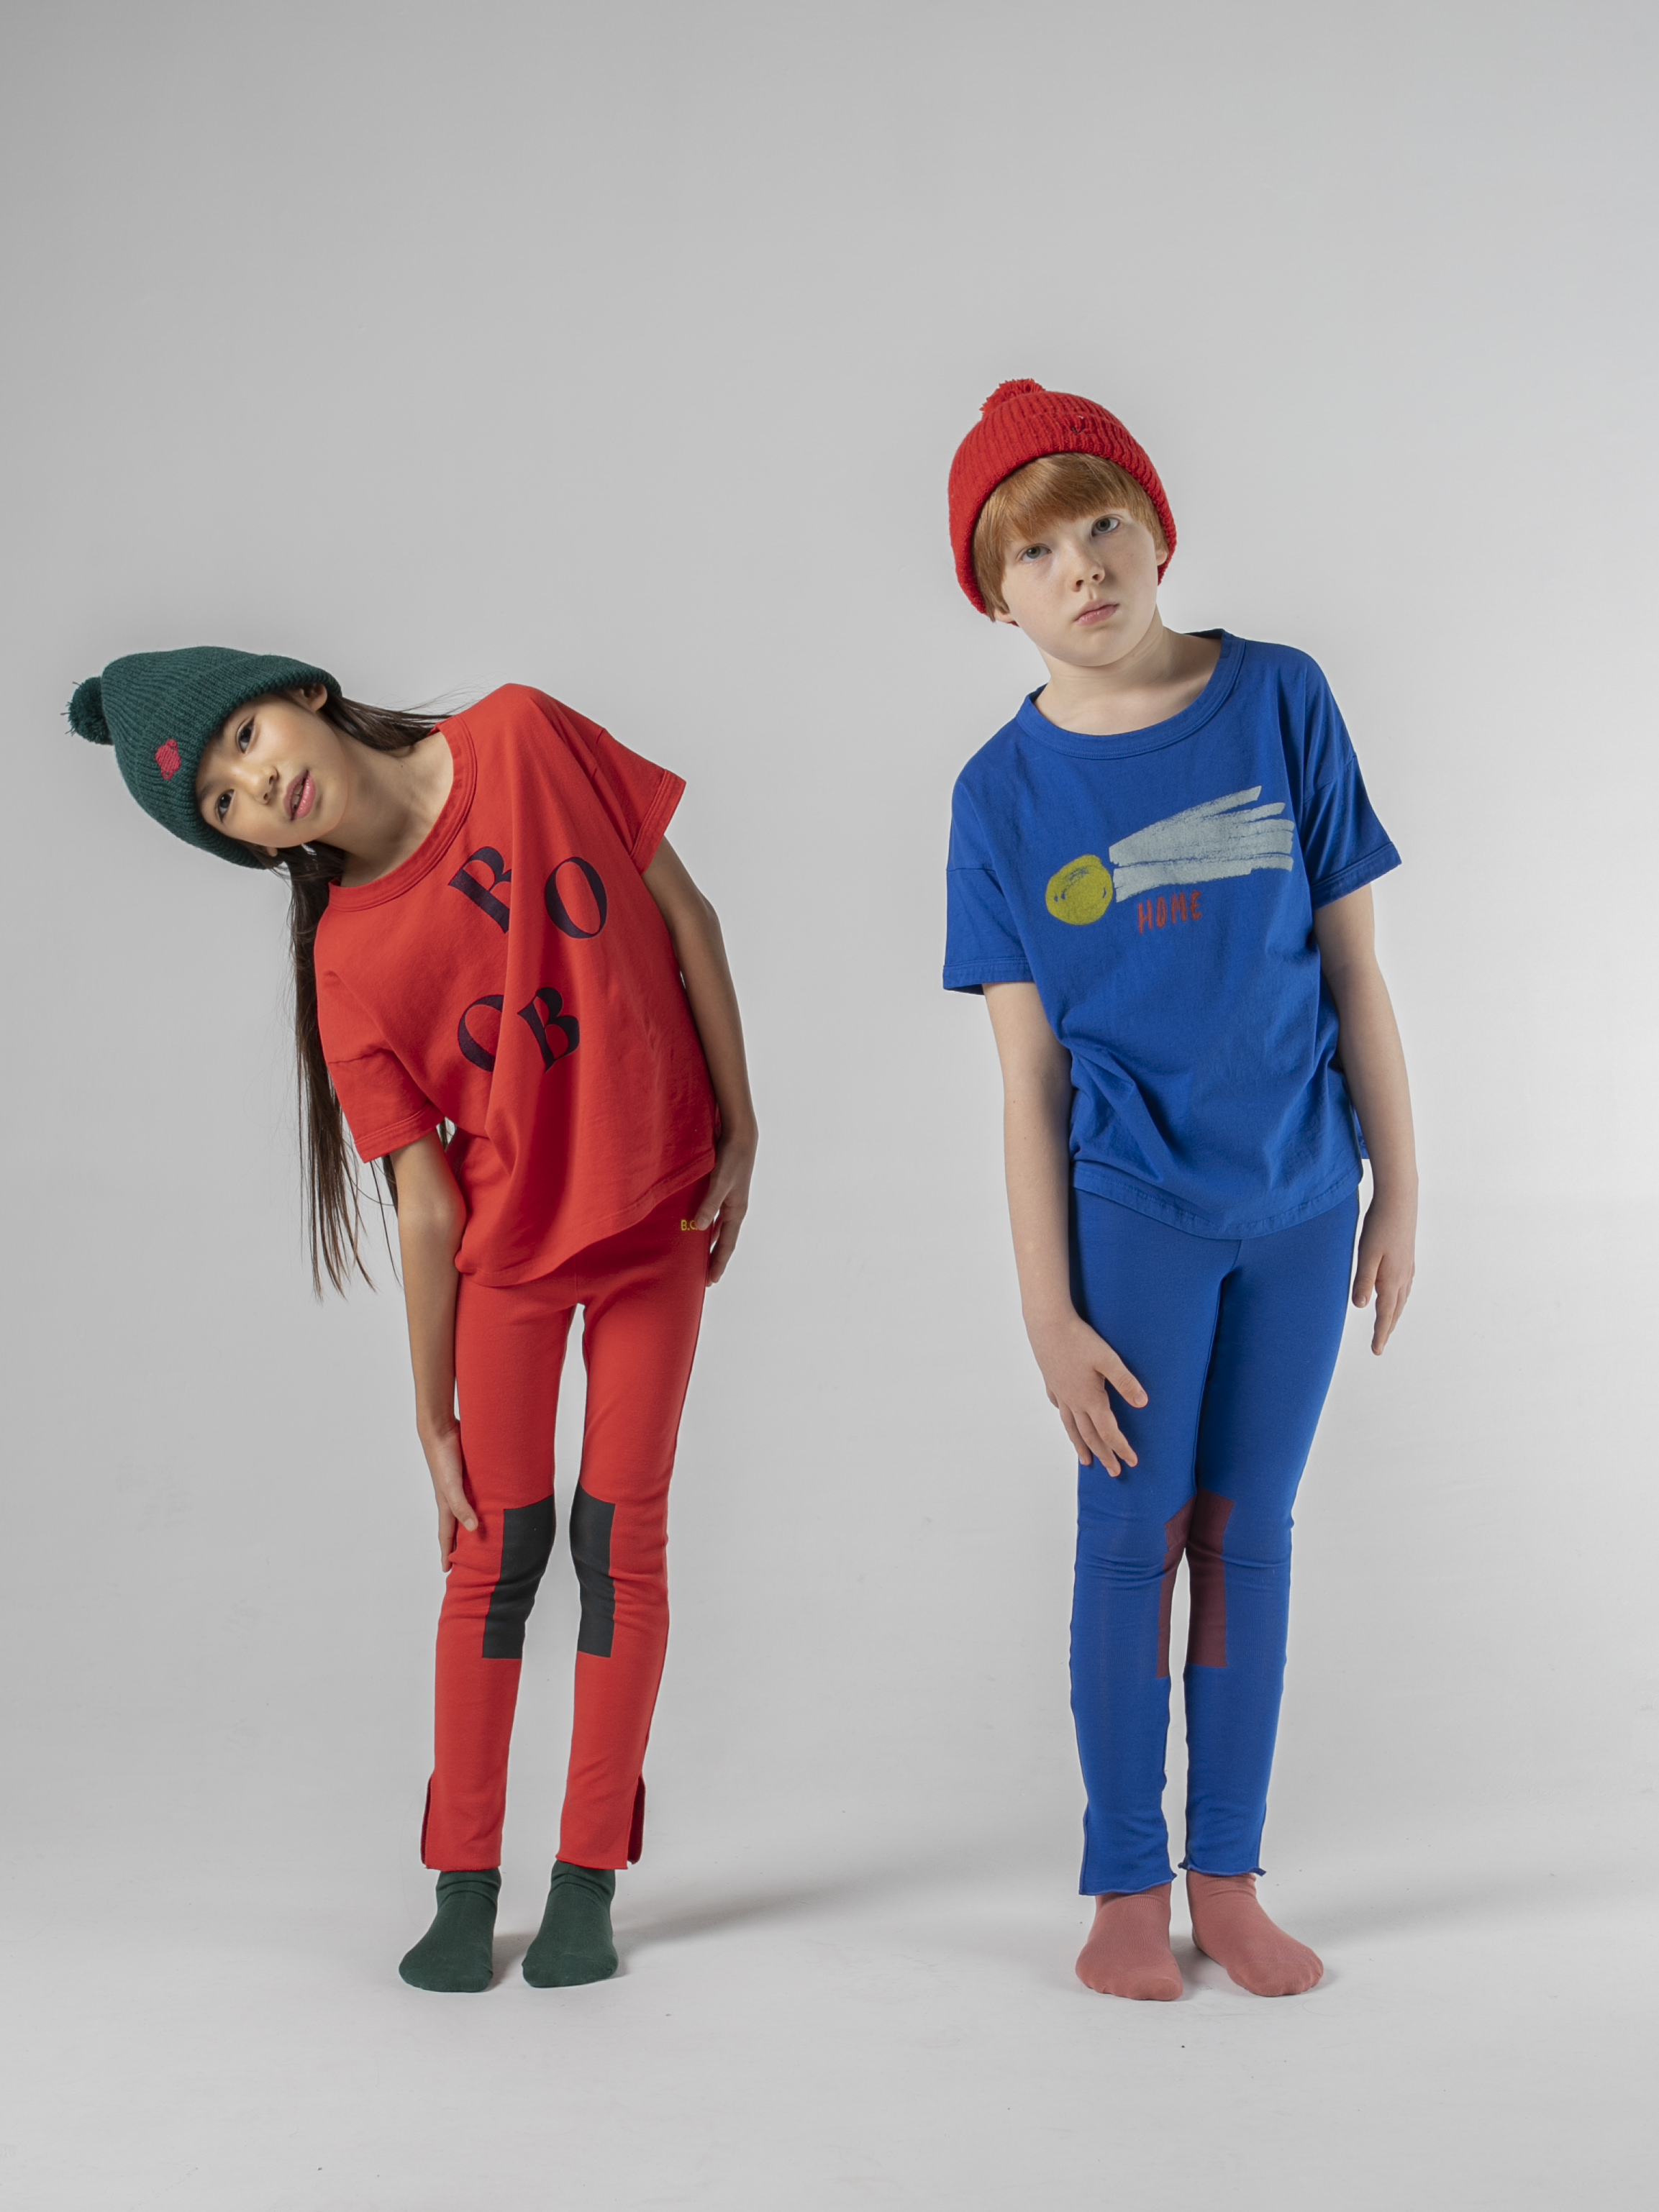 WE COSMOS AW19/20 BY BOBO CHOSES